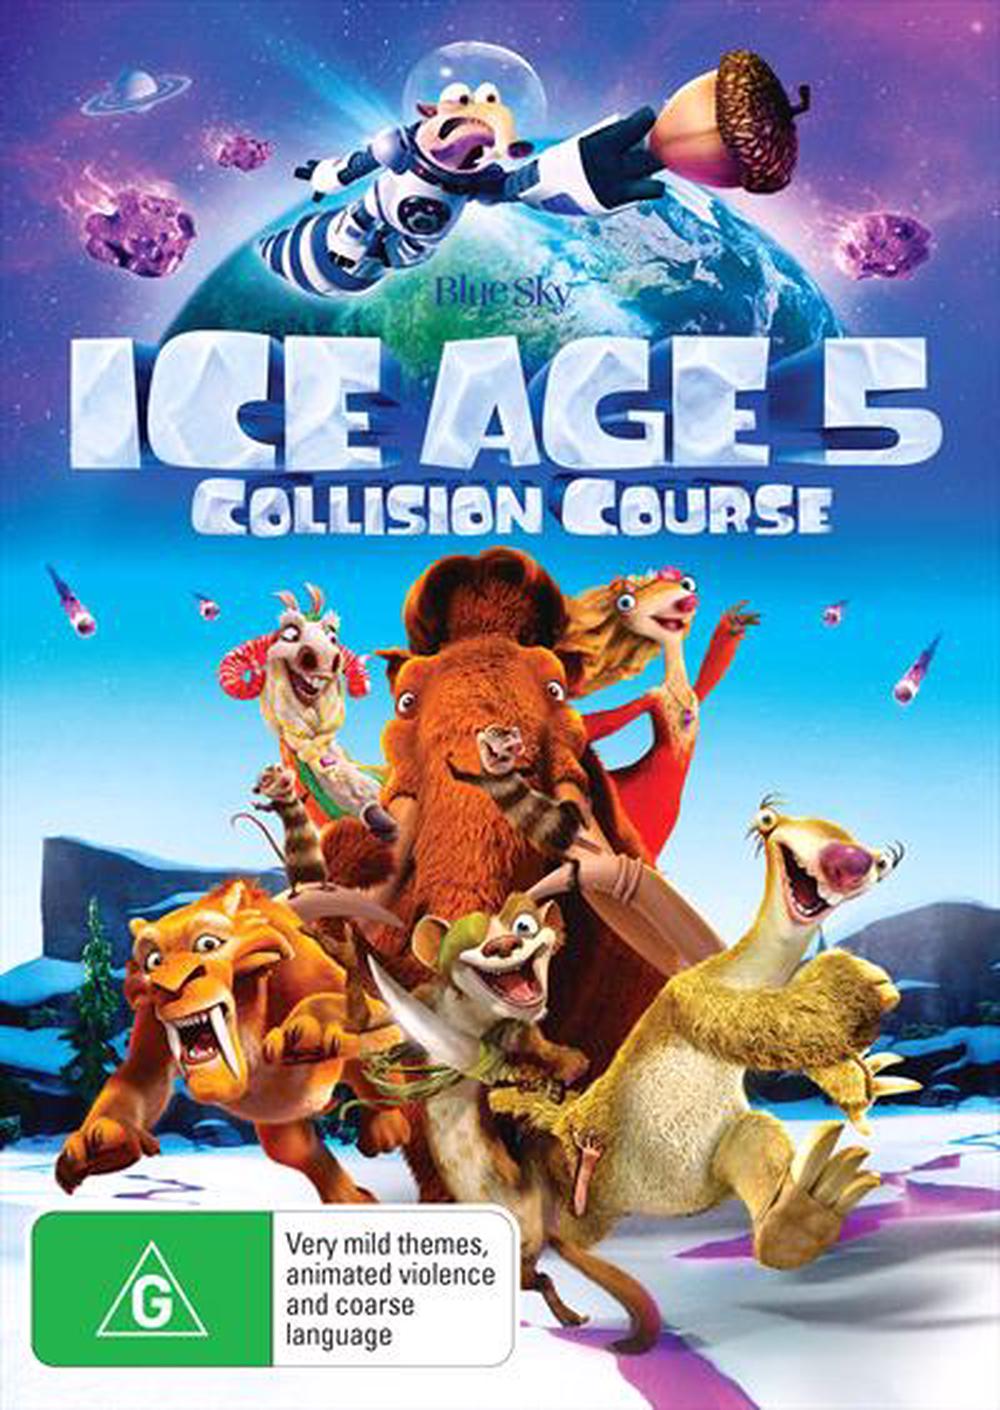 watch ice age collision course movie online